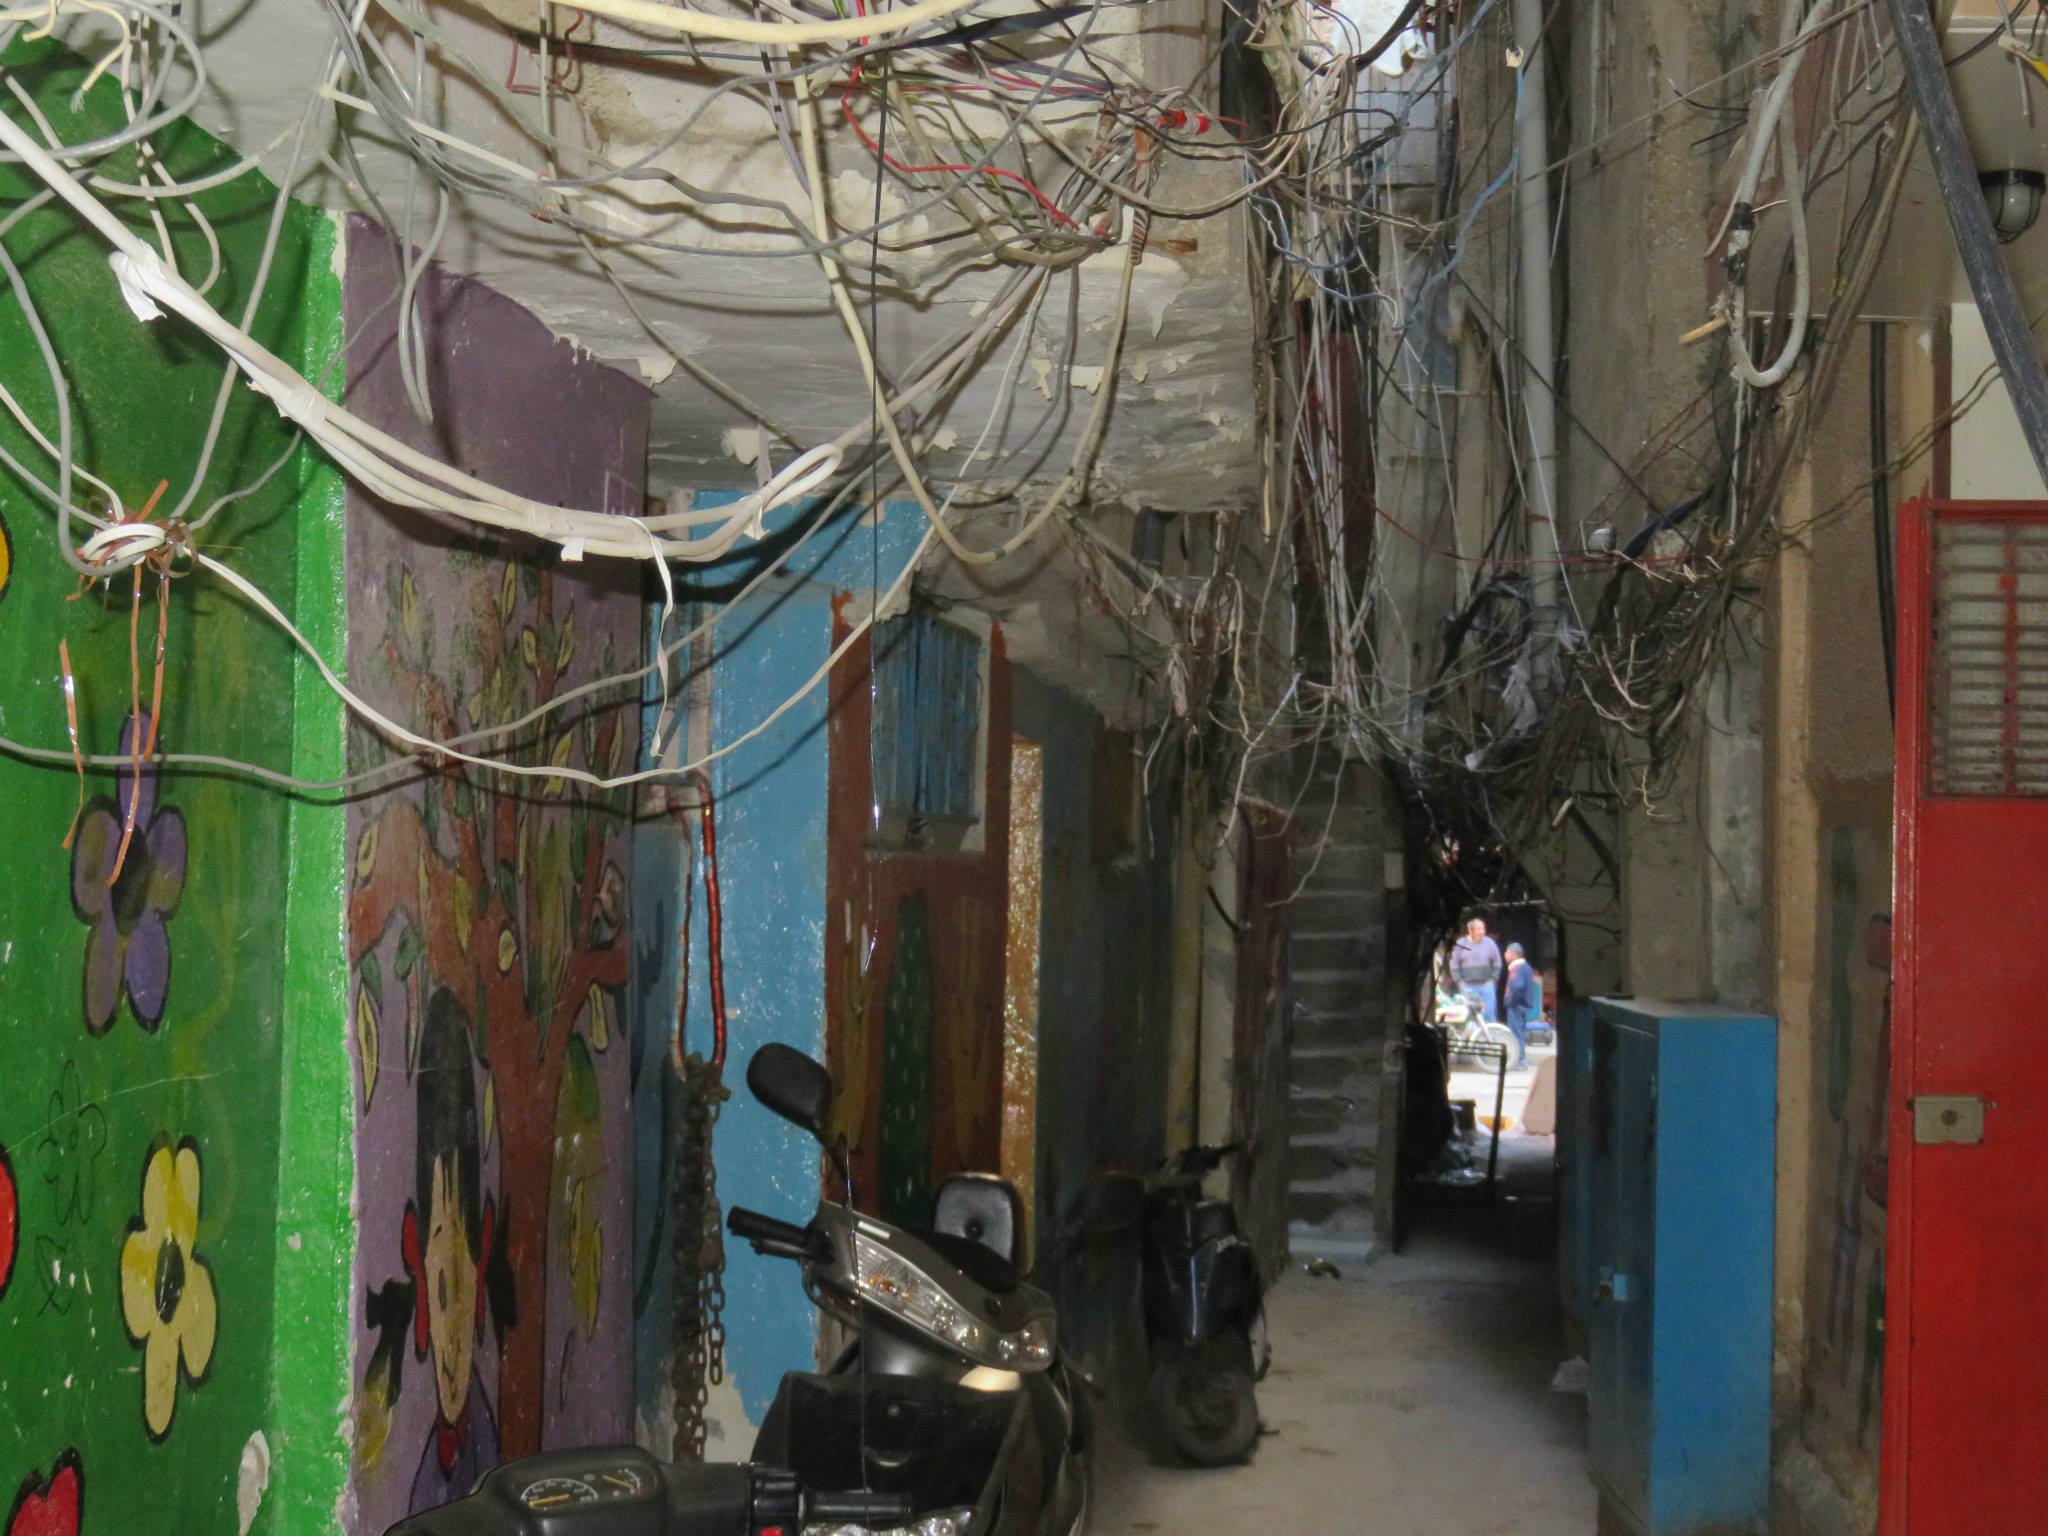 electrical wires in Beirut's Shatila camp